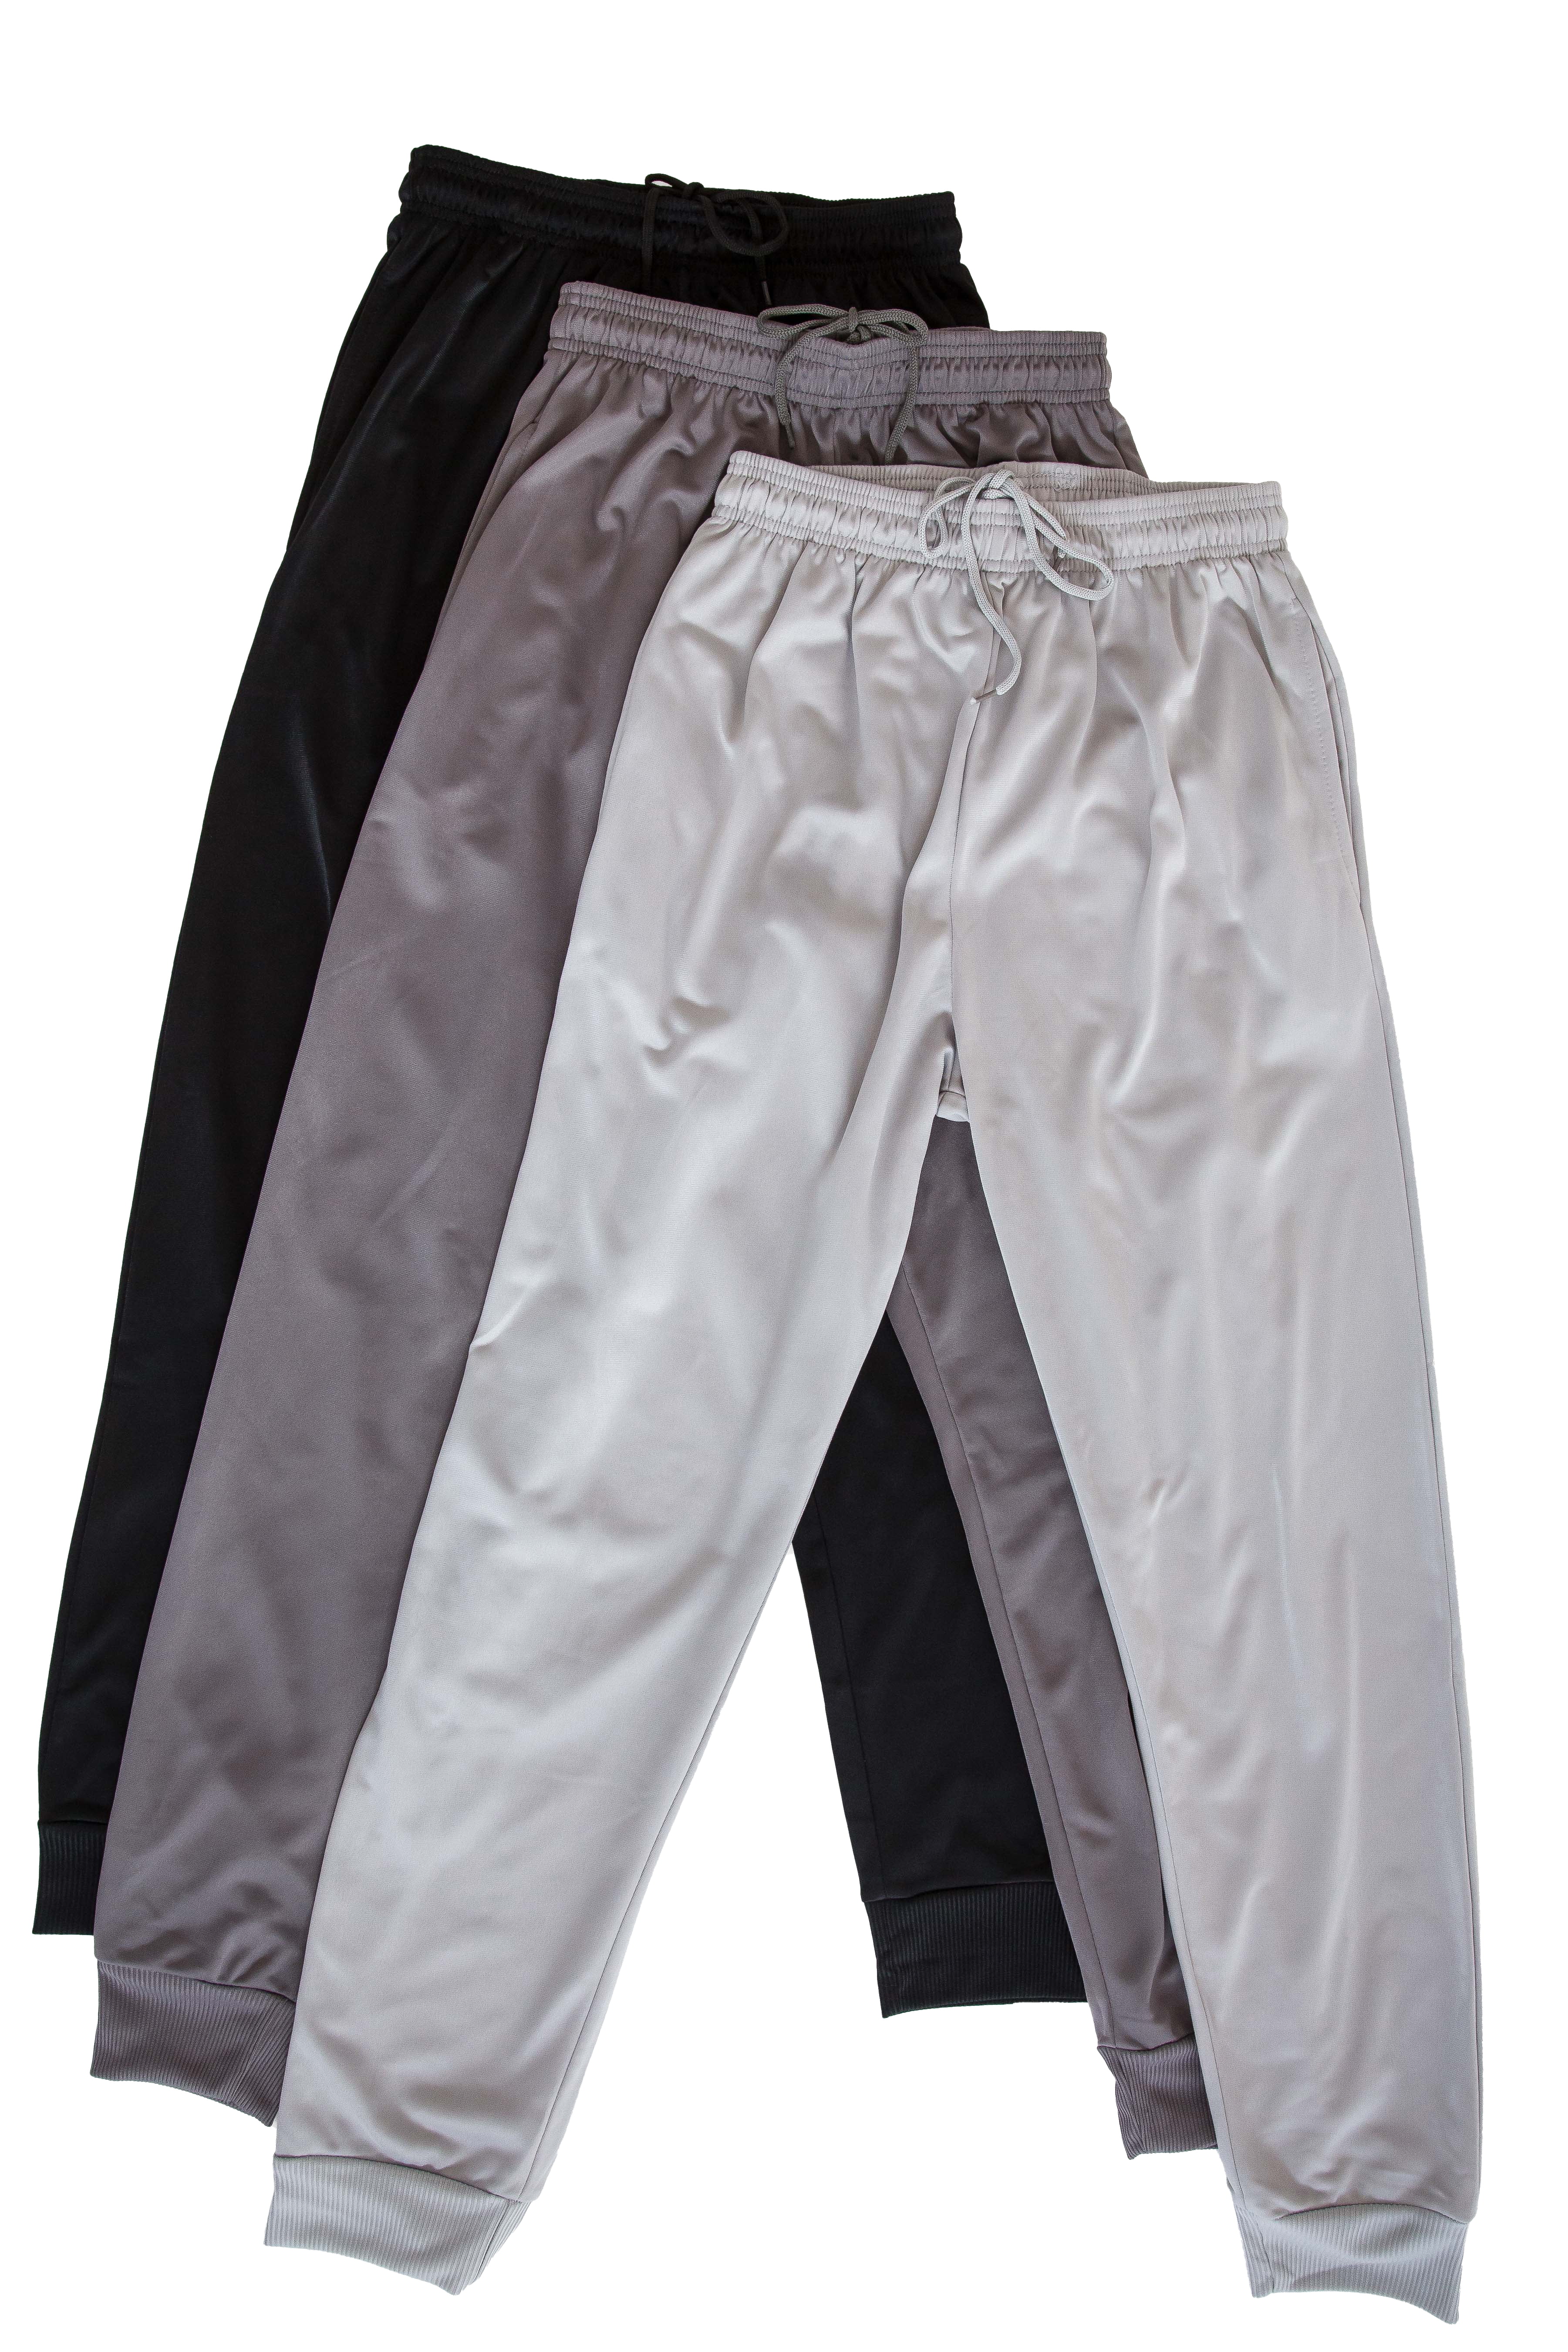 Real Essentials 3 Pack Boys Youth Active Athletic Soft Fleece Jogger Sweatpants